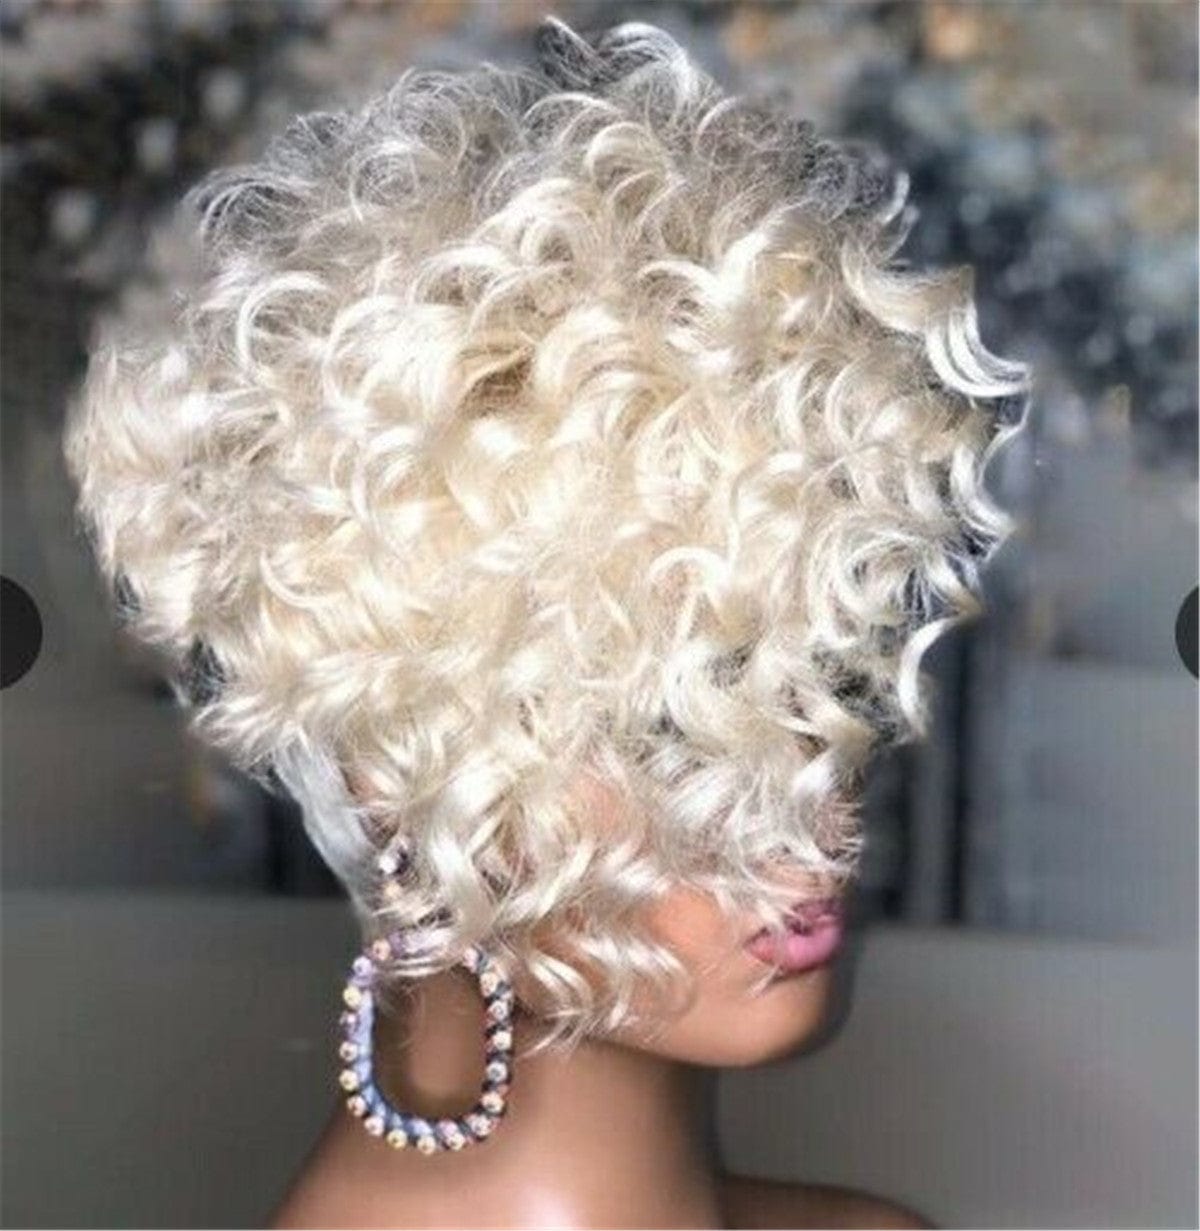 Short Platinum Blond Afro Curly Wave Pixie Cut Wig Synthetic Hair for Women Dress Party Full Wig